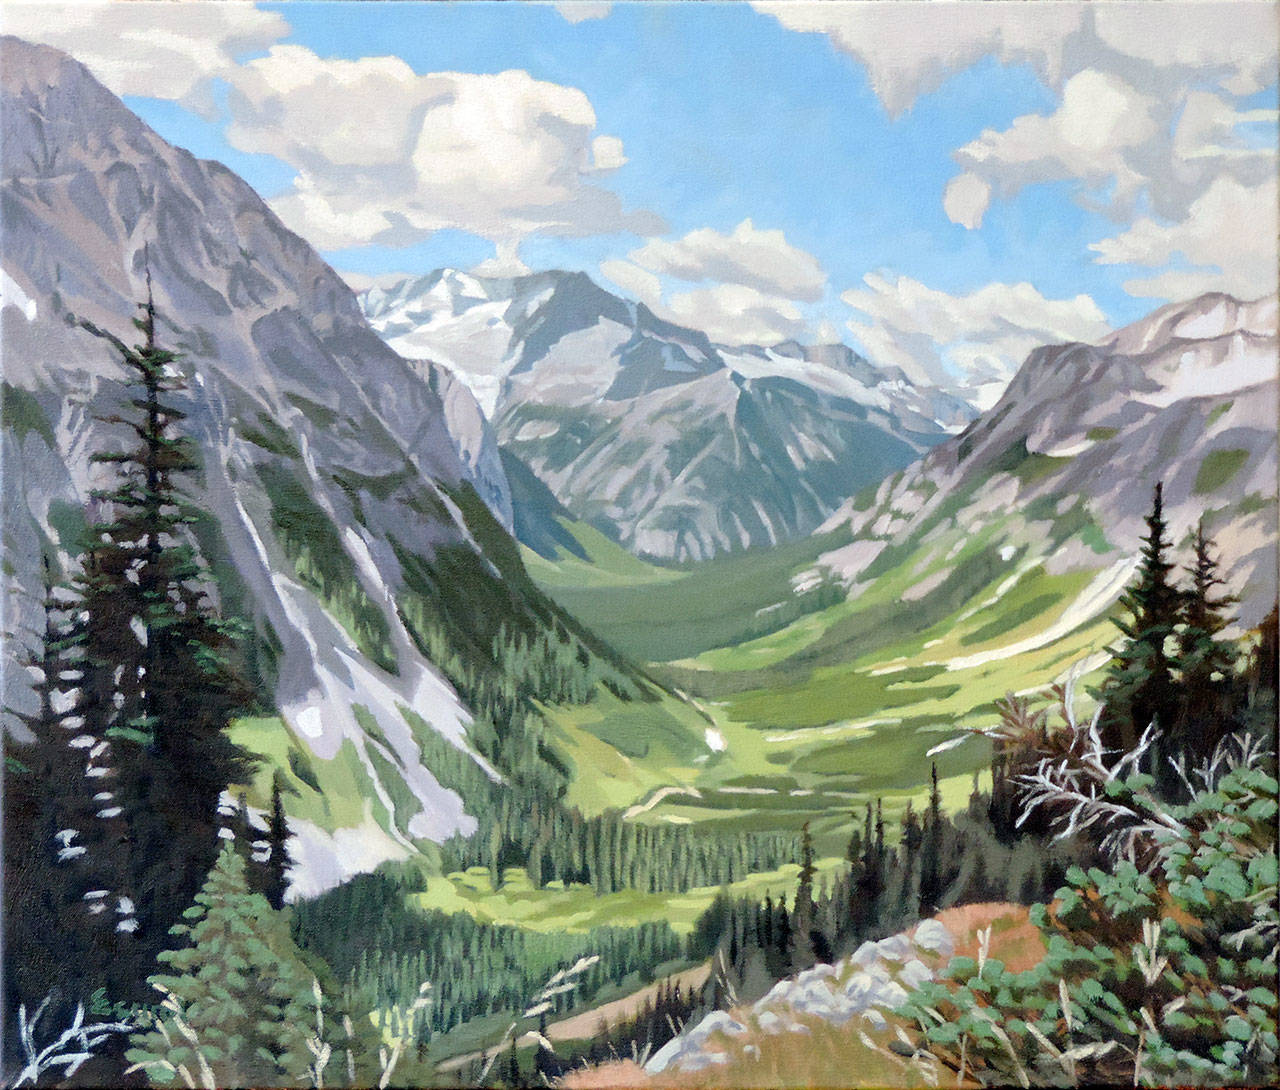 Toshi Esumi’s “Mount Logan, WA” painting will be one of the 63 pieces on display at the Northwind Arts Center’s juried show “Expressions Northwest” through Aug. 27. (Toshi Esumi)